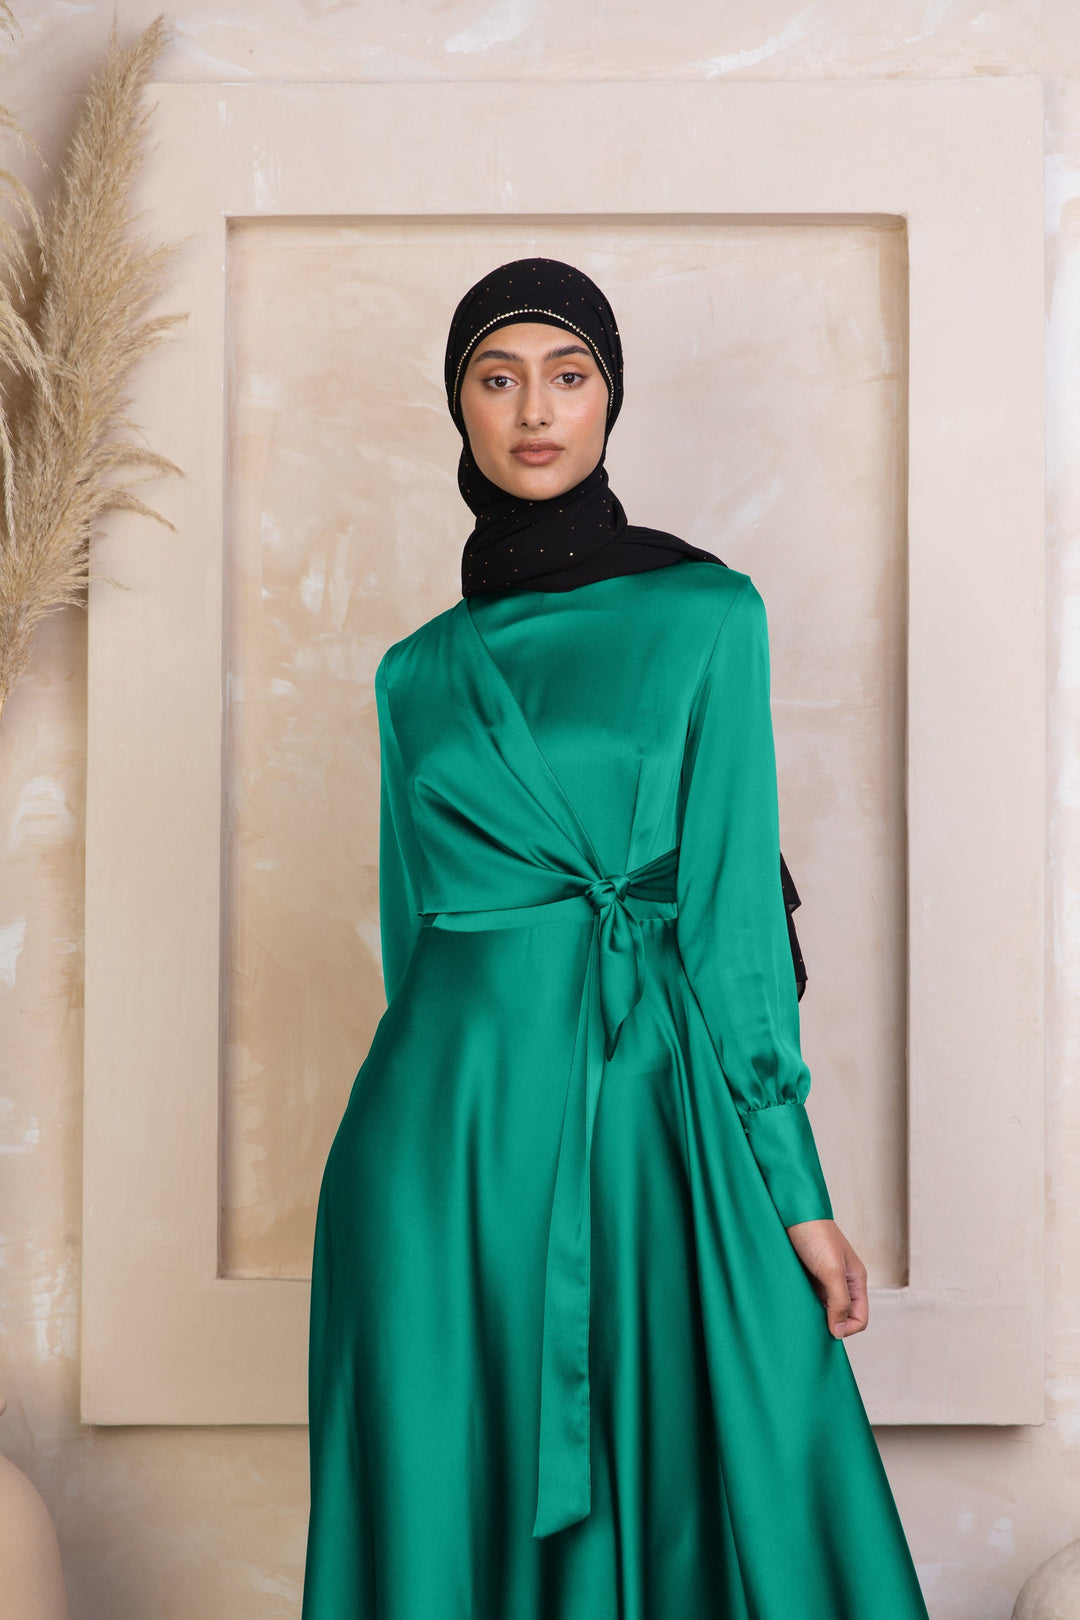 a woman wearing a green dress with a black head scarf